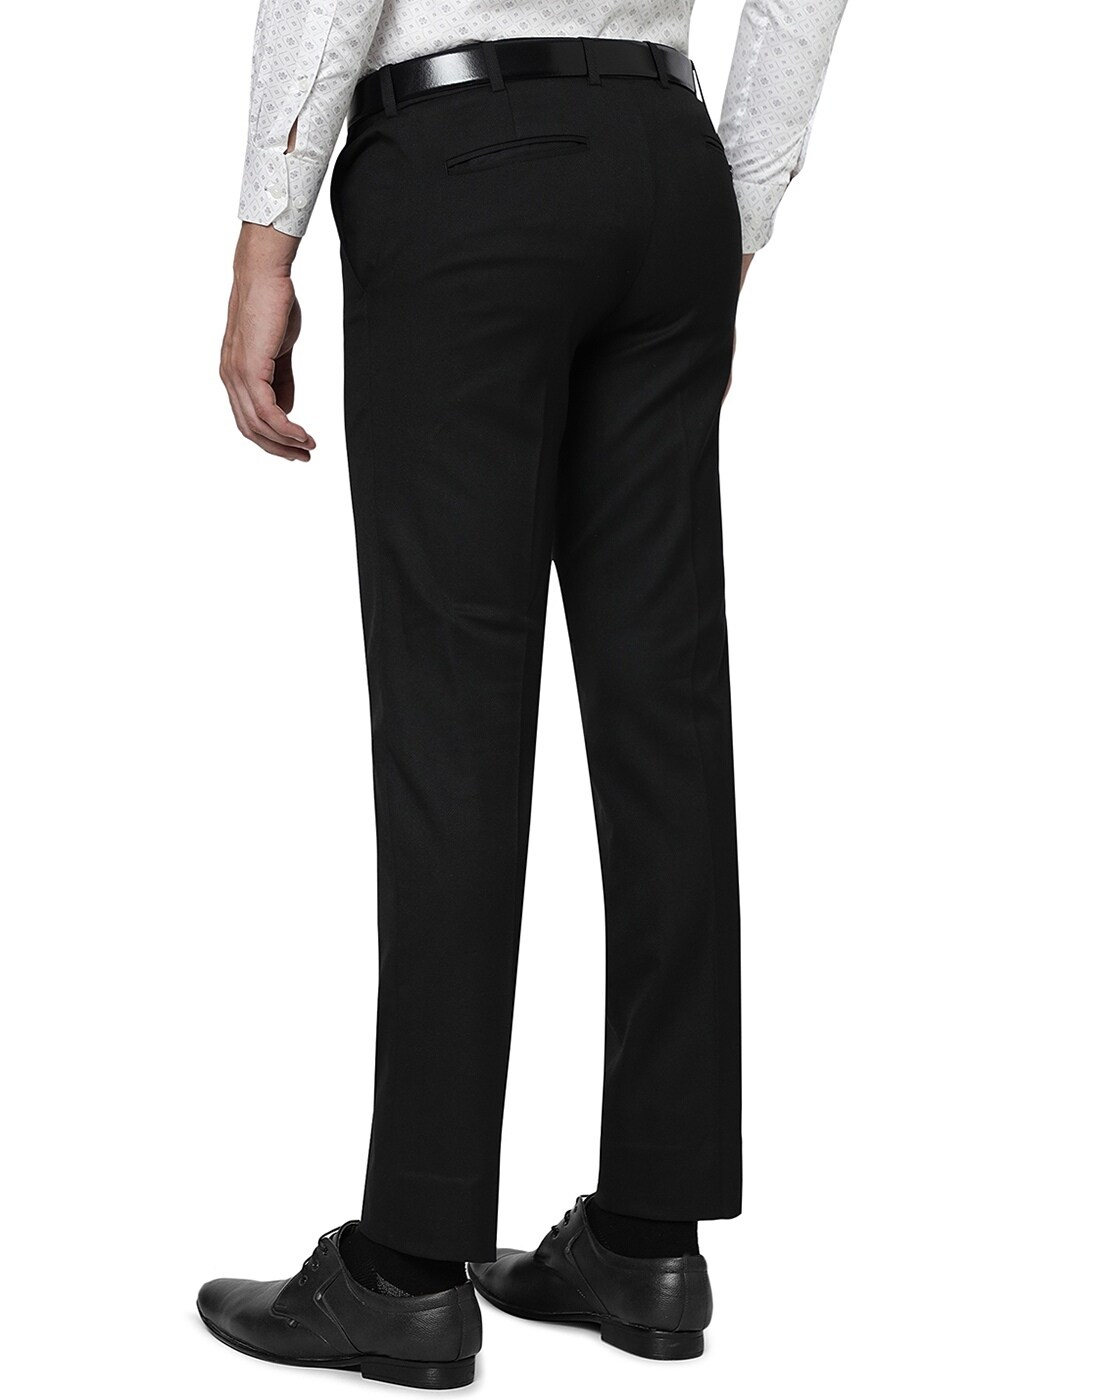 Buy Brown Trousers & Pants for Men by MUFTI Online | Ajio.com